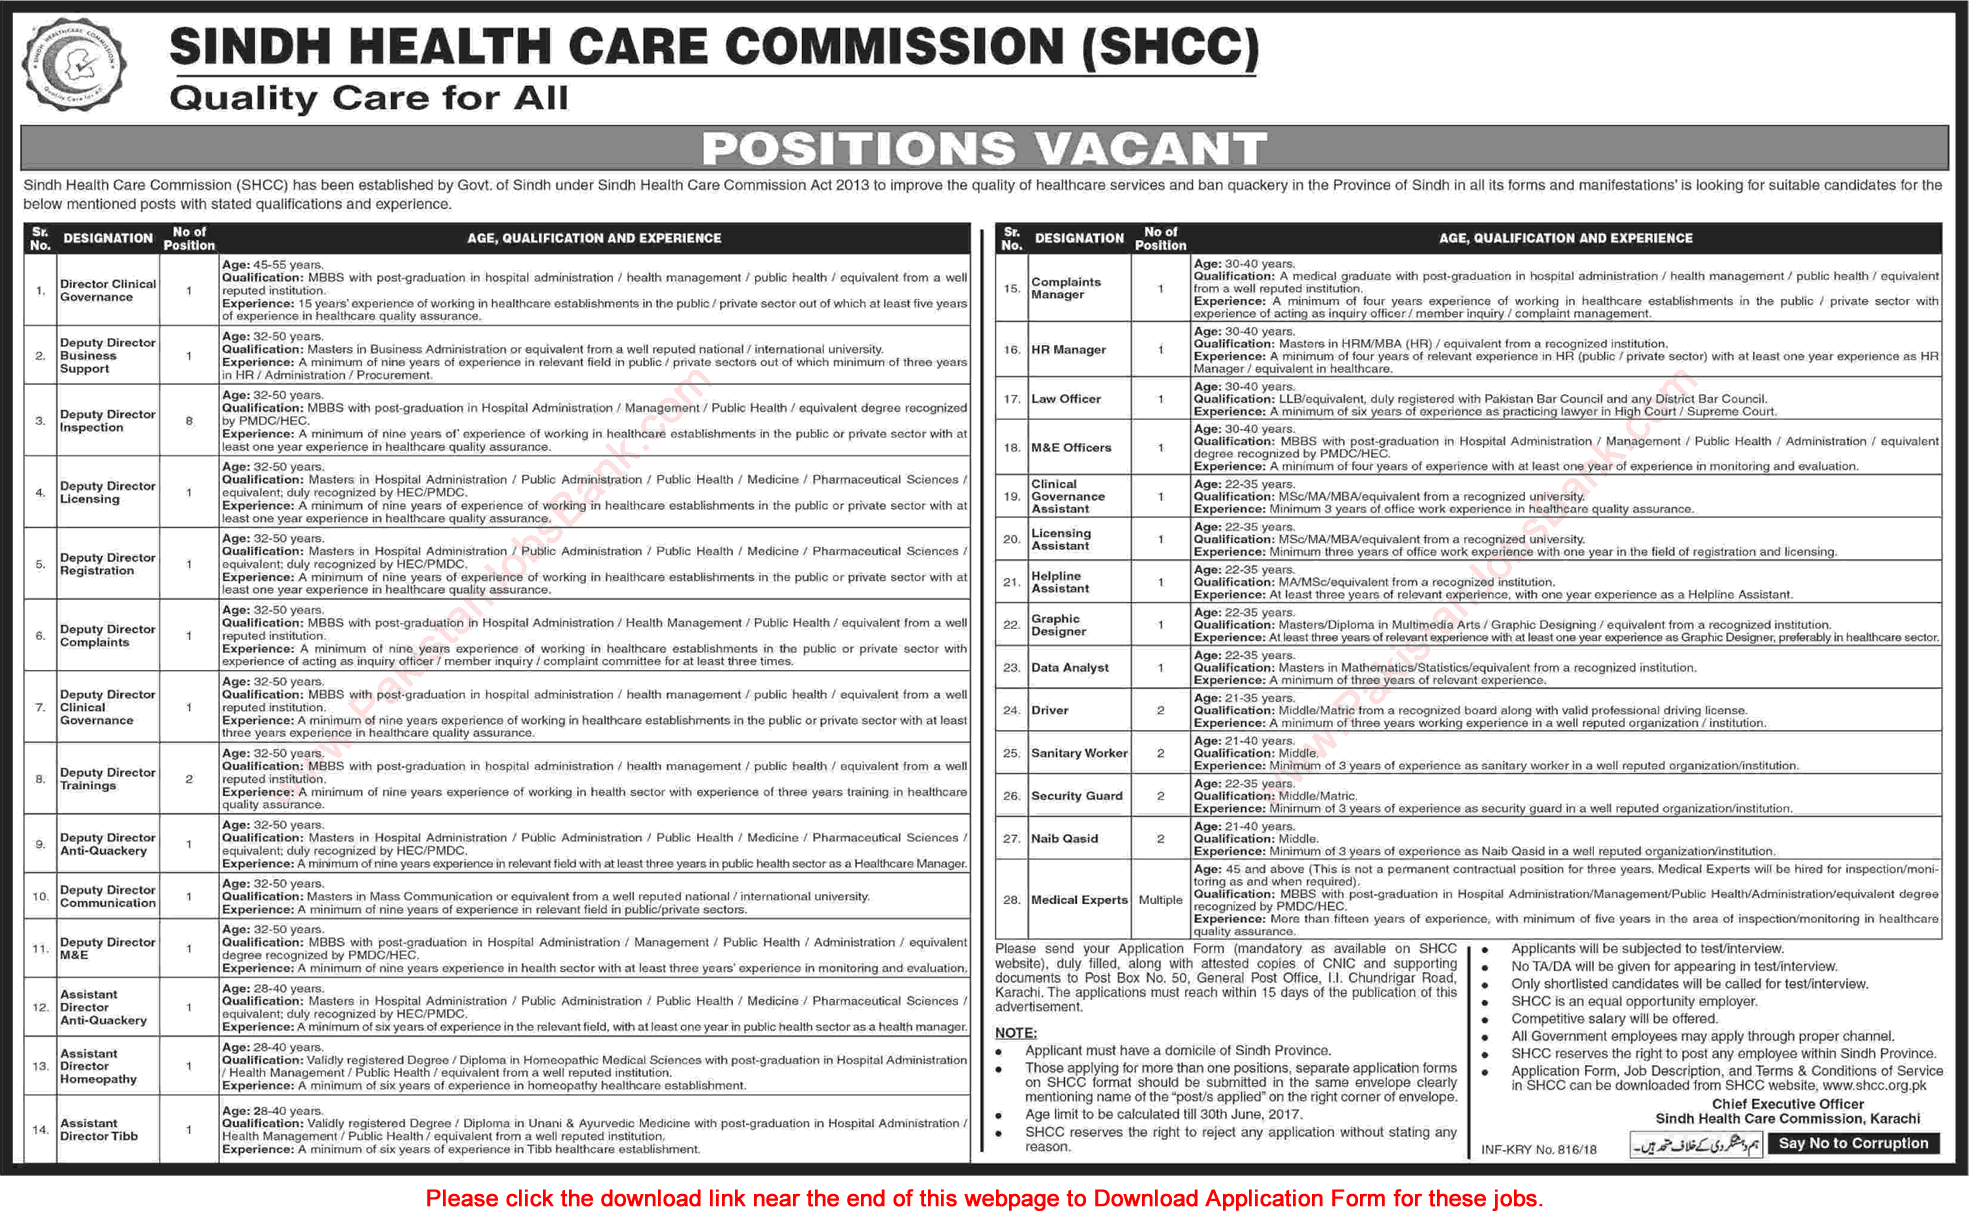 Sindh Healthcare Commission Jobs 2018 February Application Form Download SHCC Latest